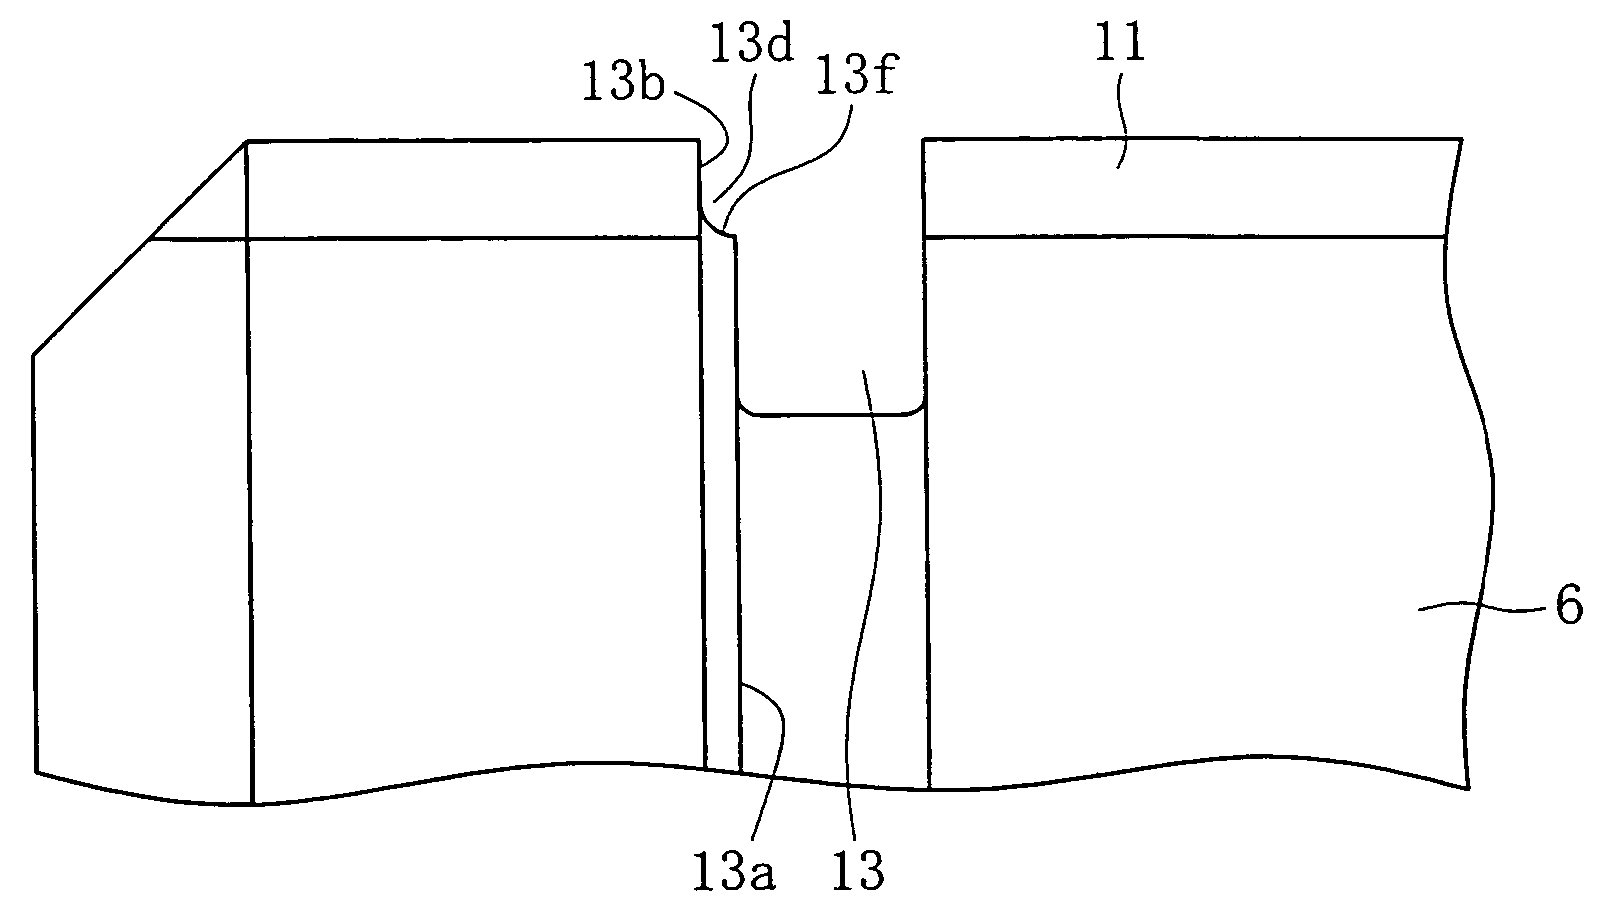 Structure for preventing shaft of constant velocity joint from coming off